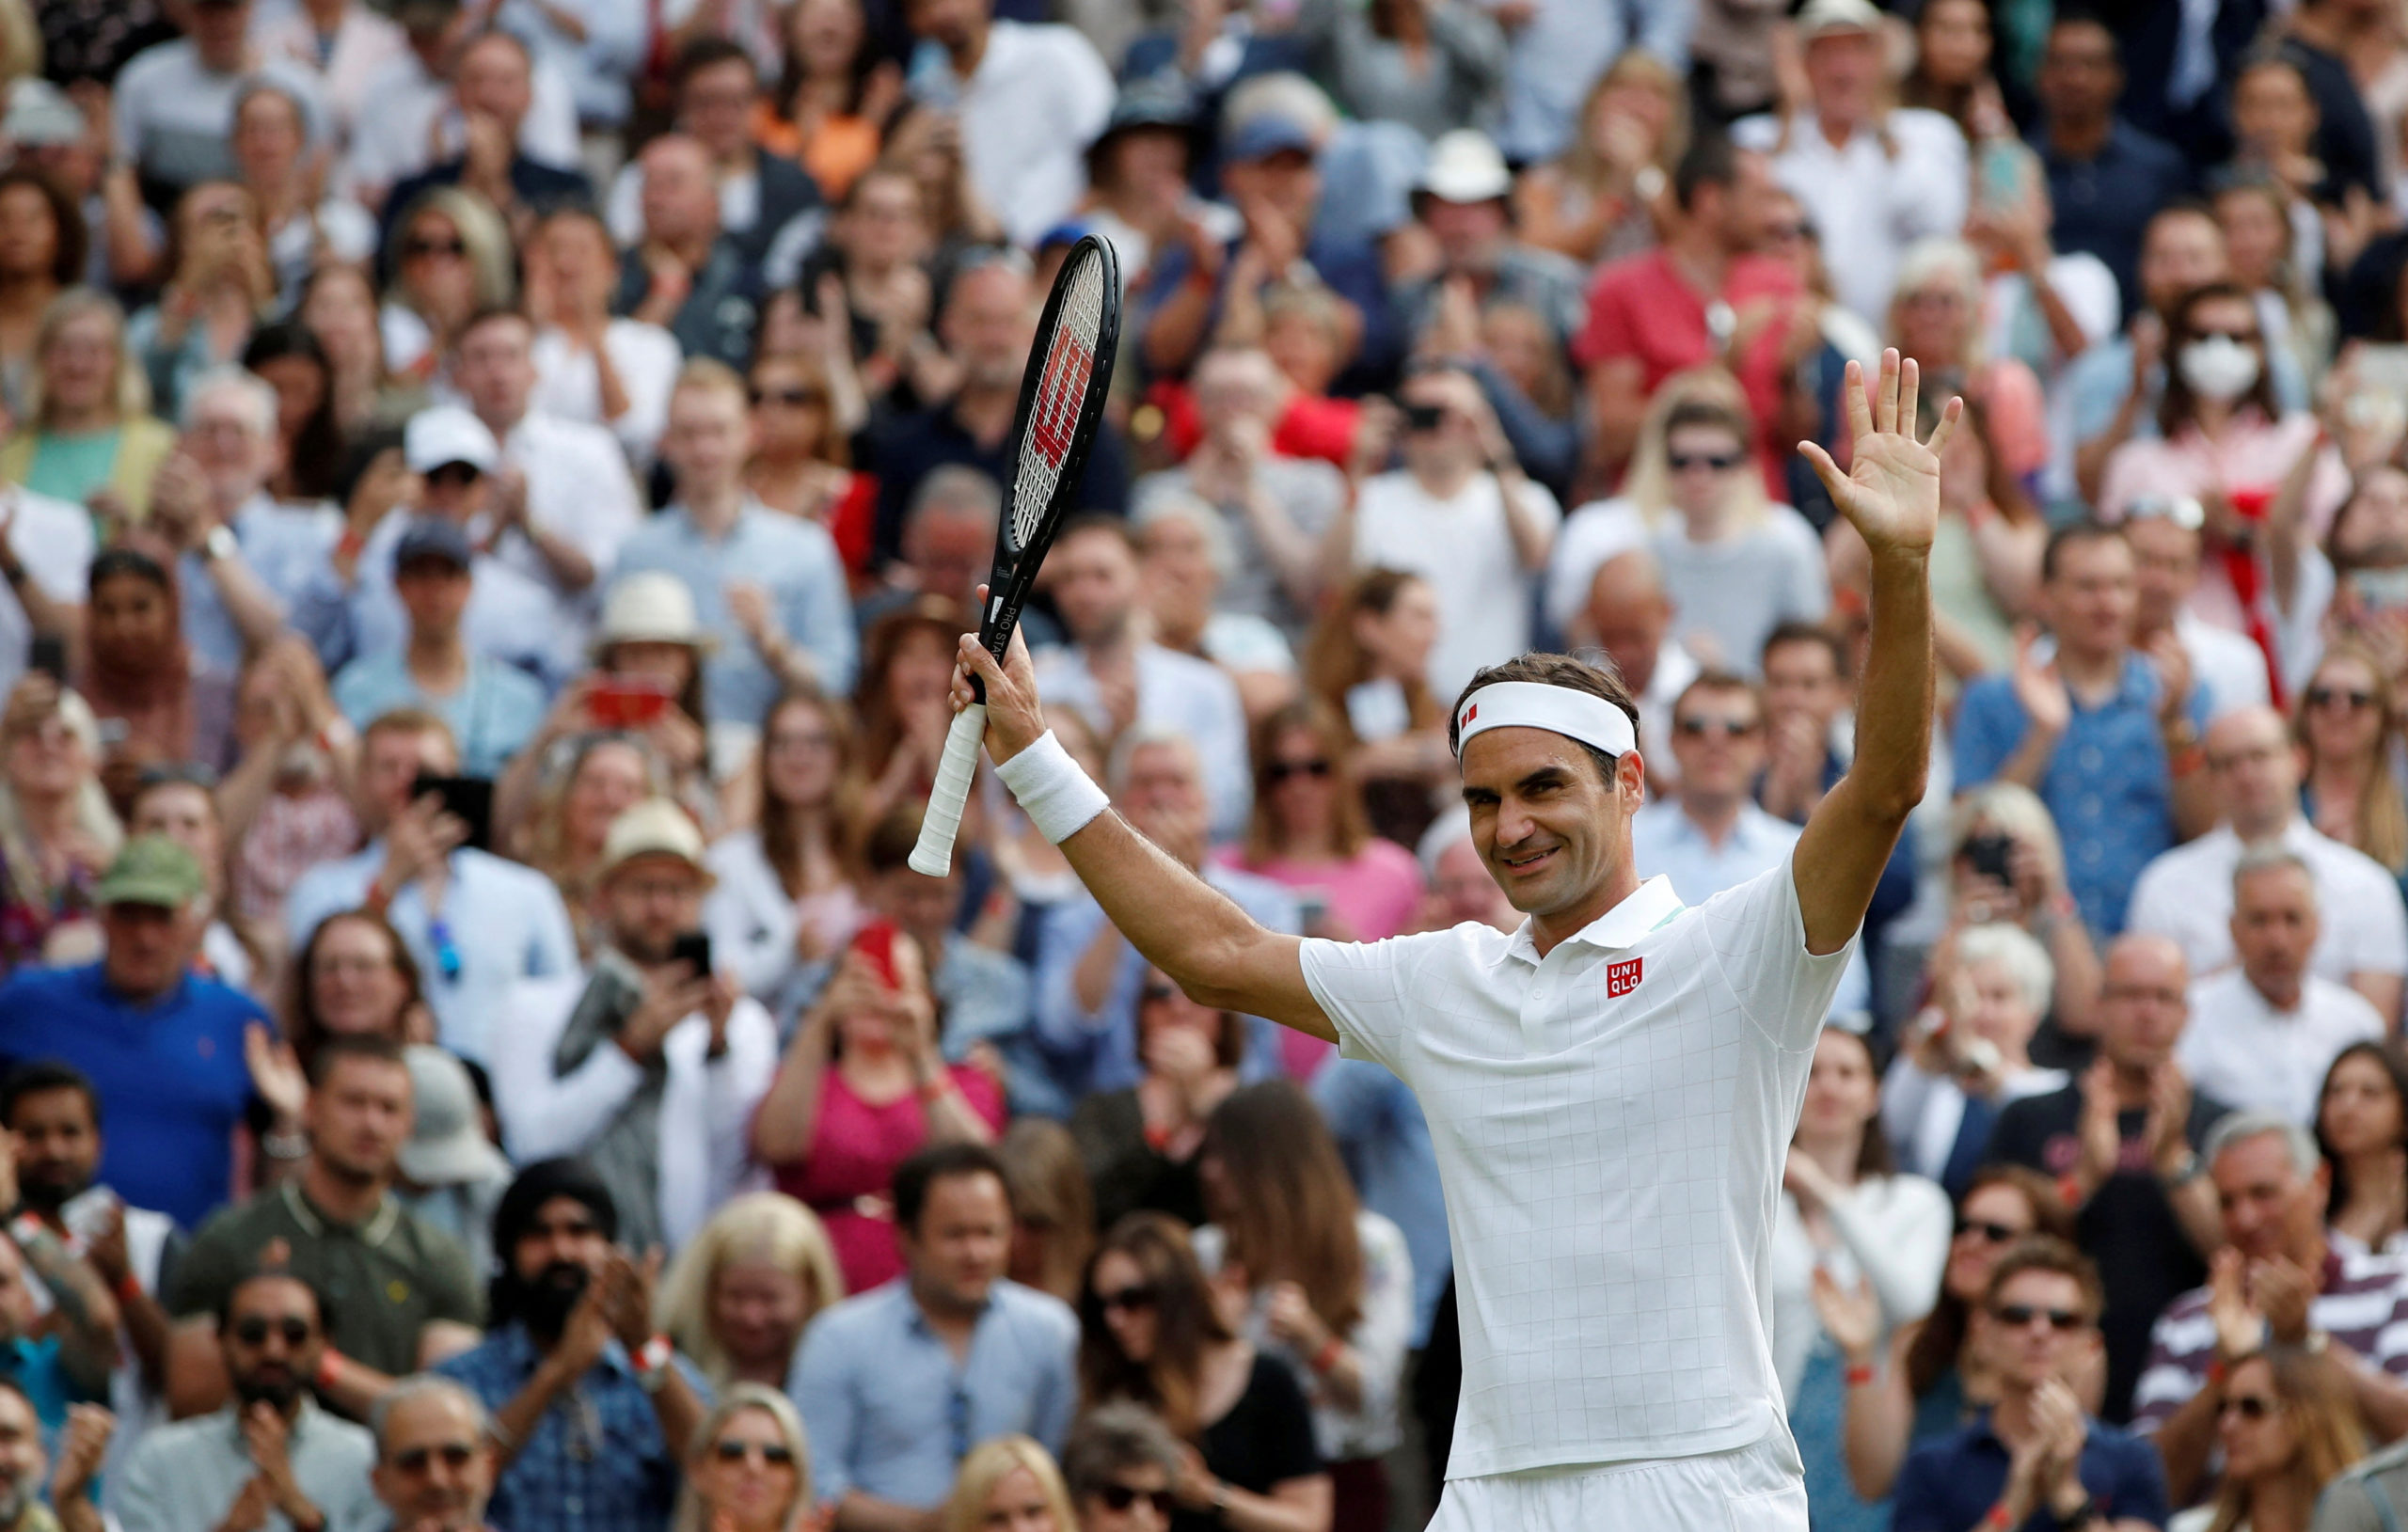 FILE PHOTO: Tennis - Wimbledon - All England Lawn Tennis and Croquet Club, London, Britain - July 1, 2021 Switzerland's Roger Federer celebrates winning his second round match against France's Richard Gasquet 